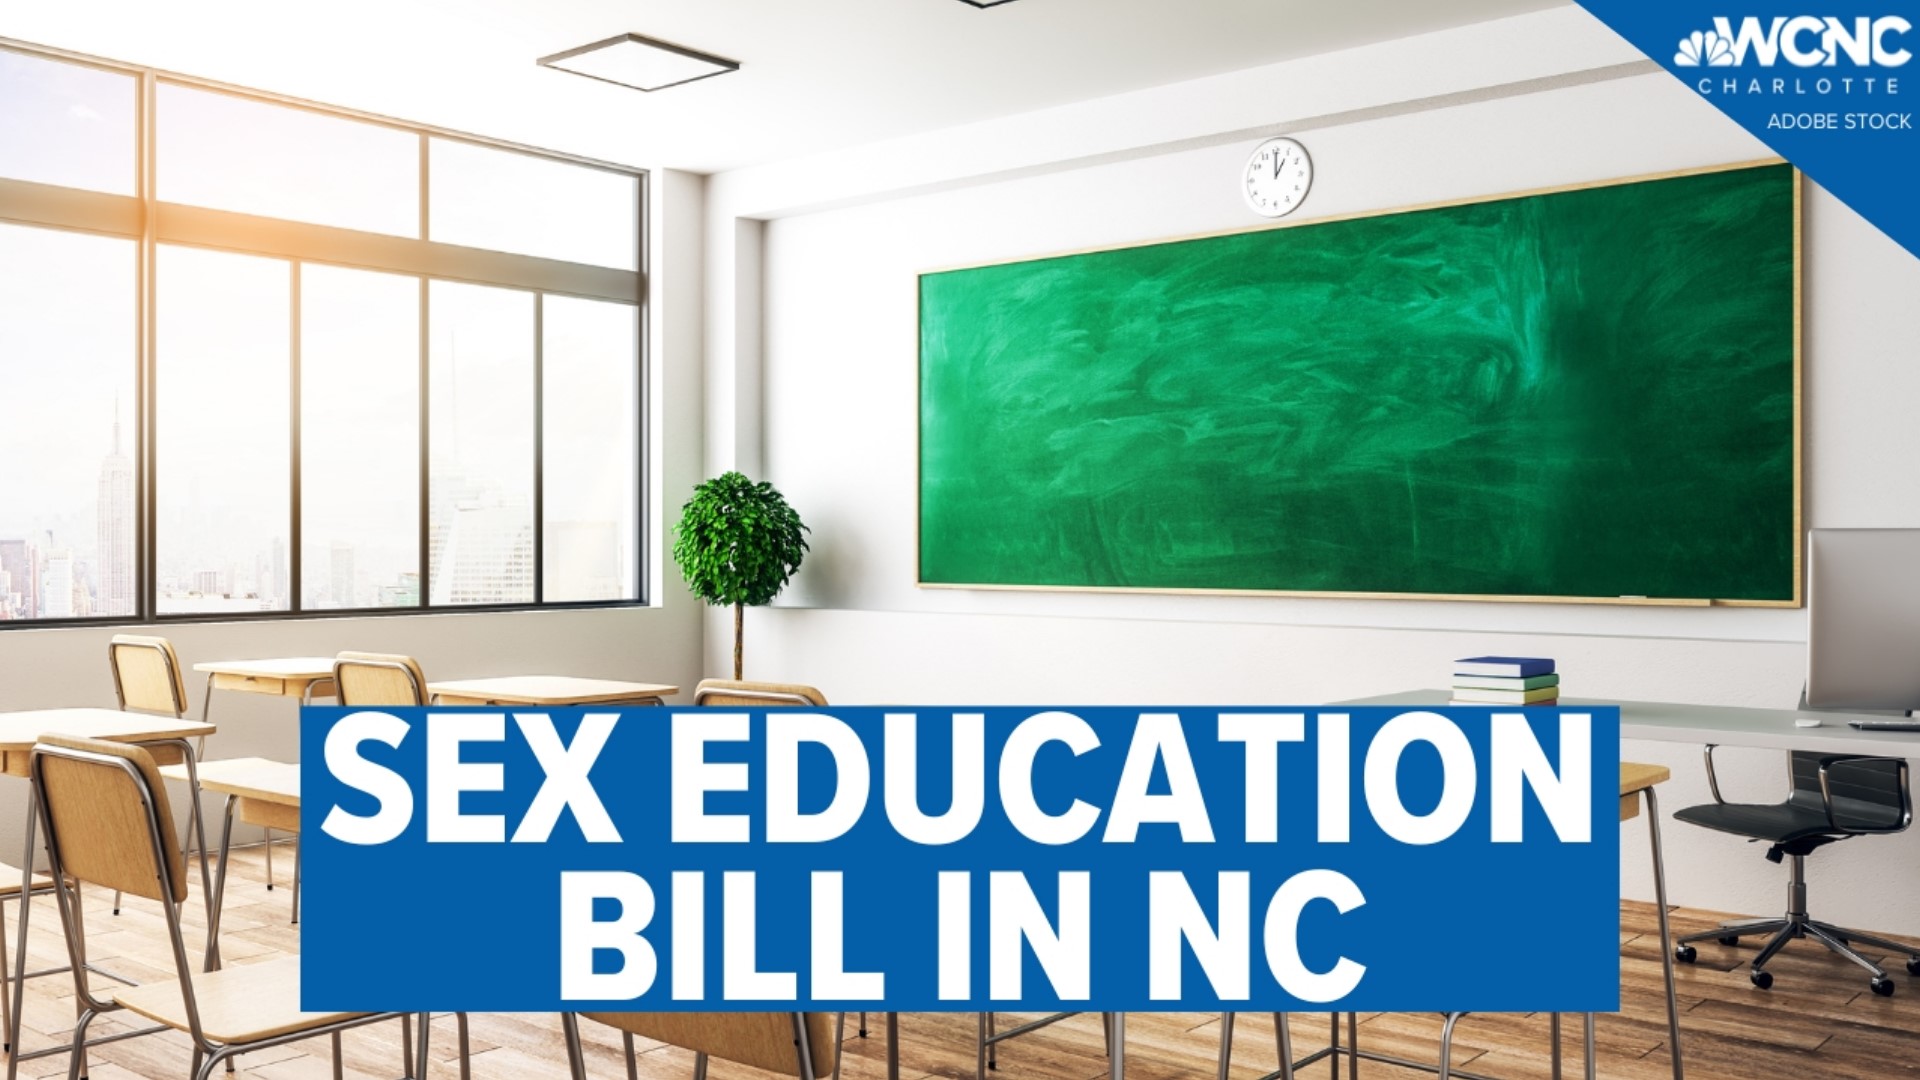 An effort is underway to change how sex education is taught in North Carolina's public schools.